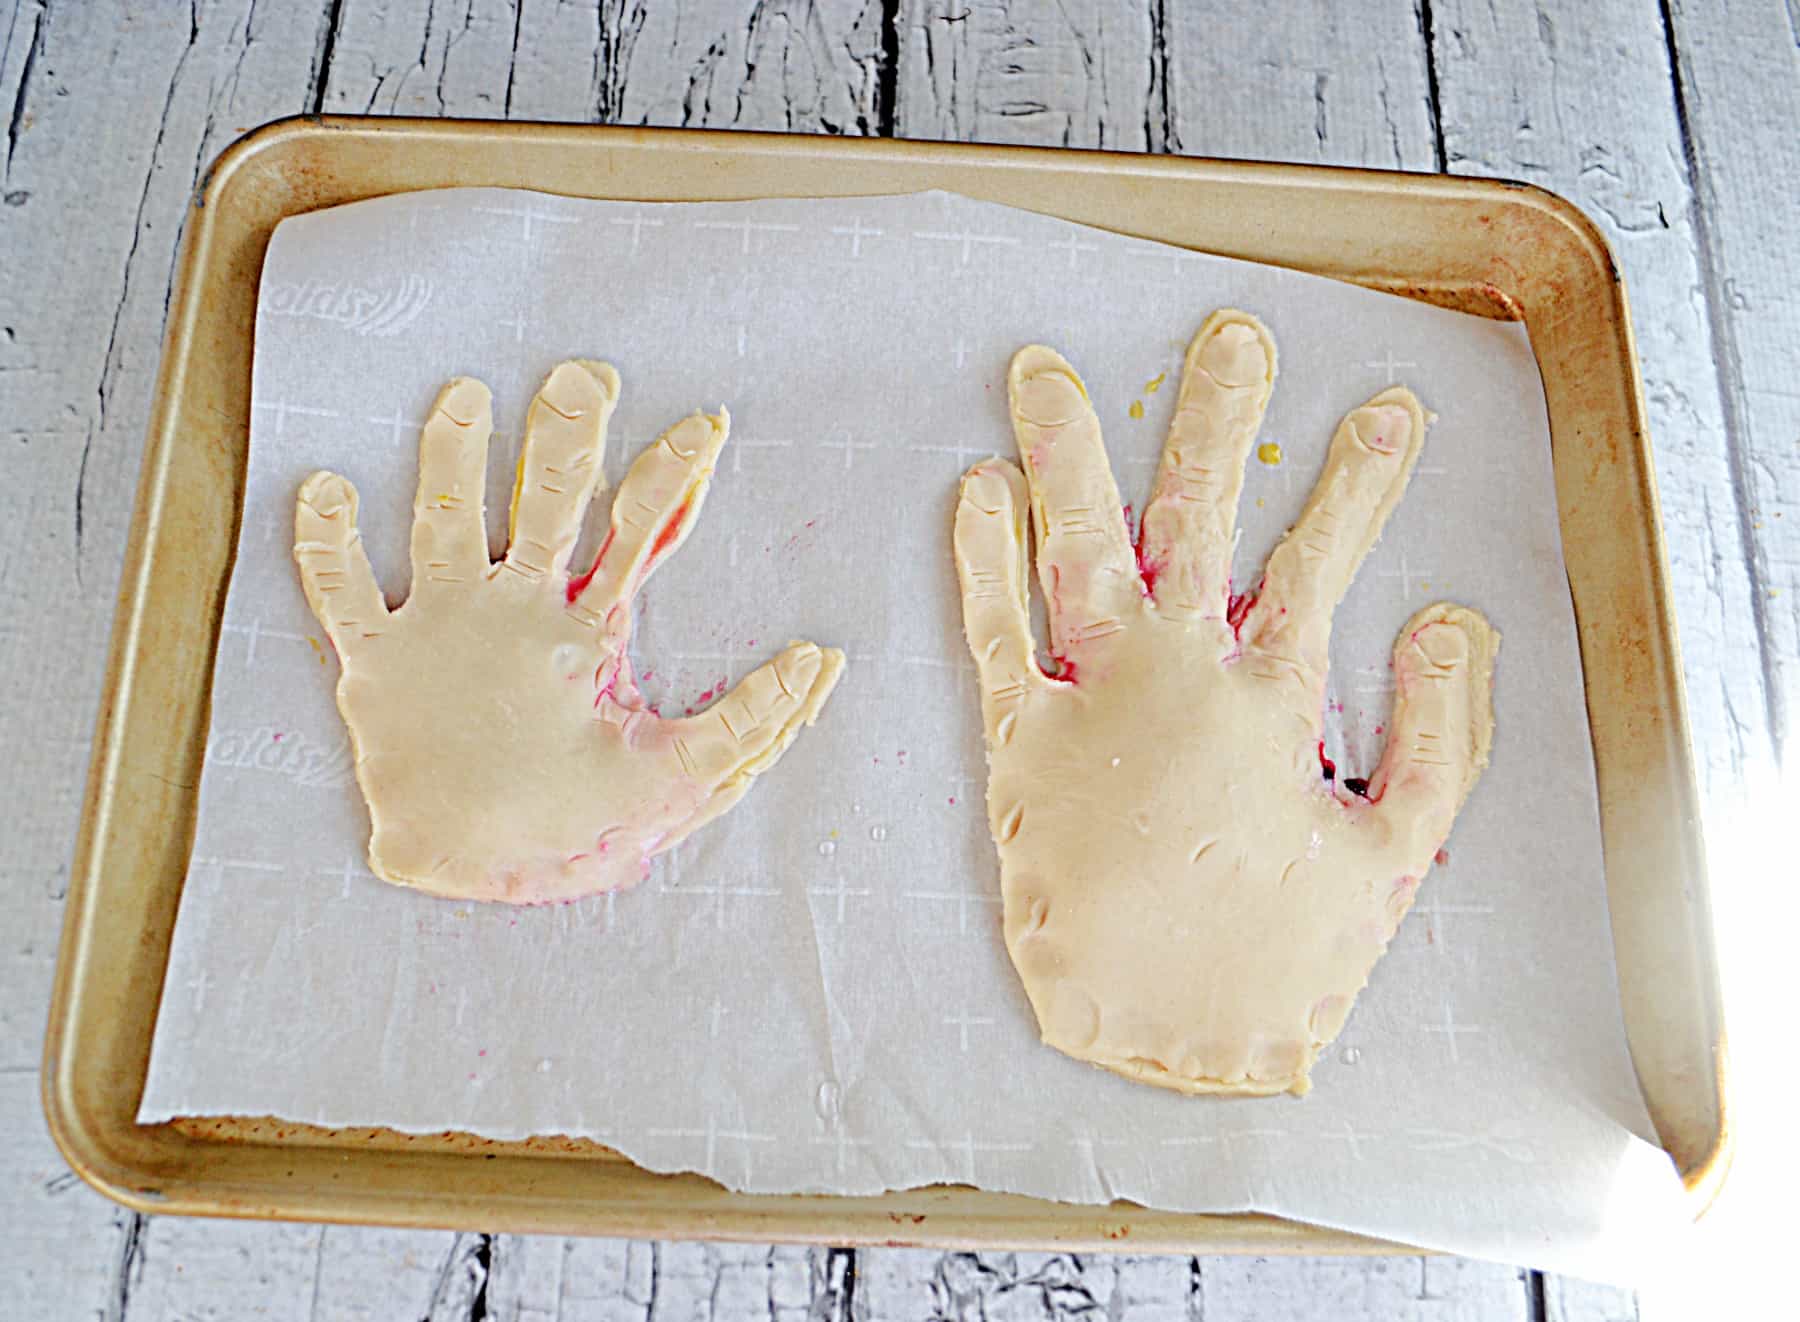 Hand prints cut from pie crust and filled with homemade jam. 